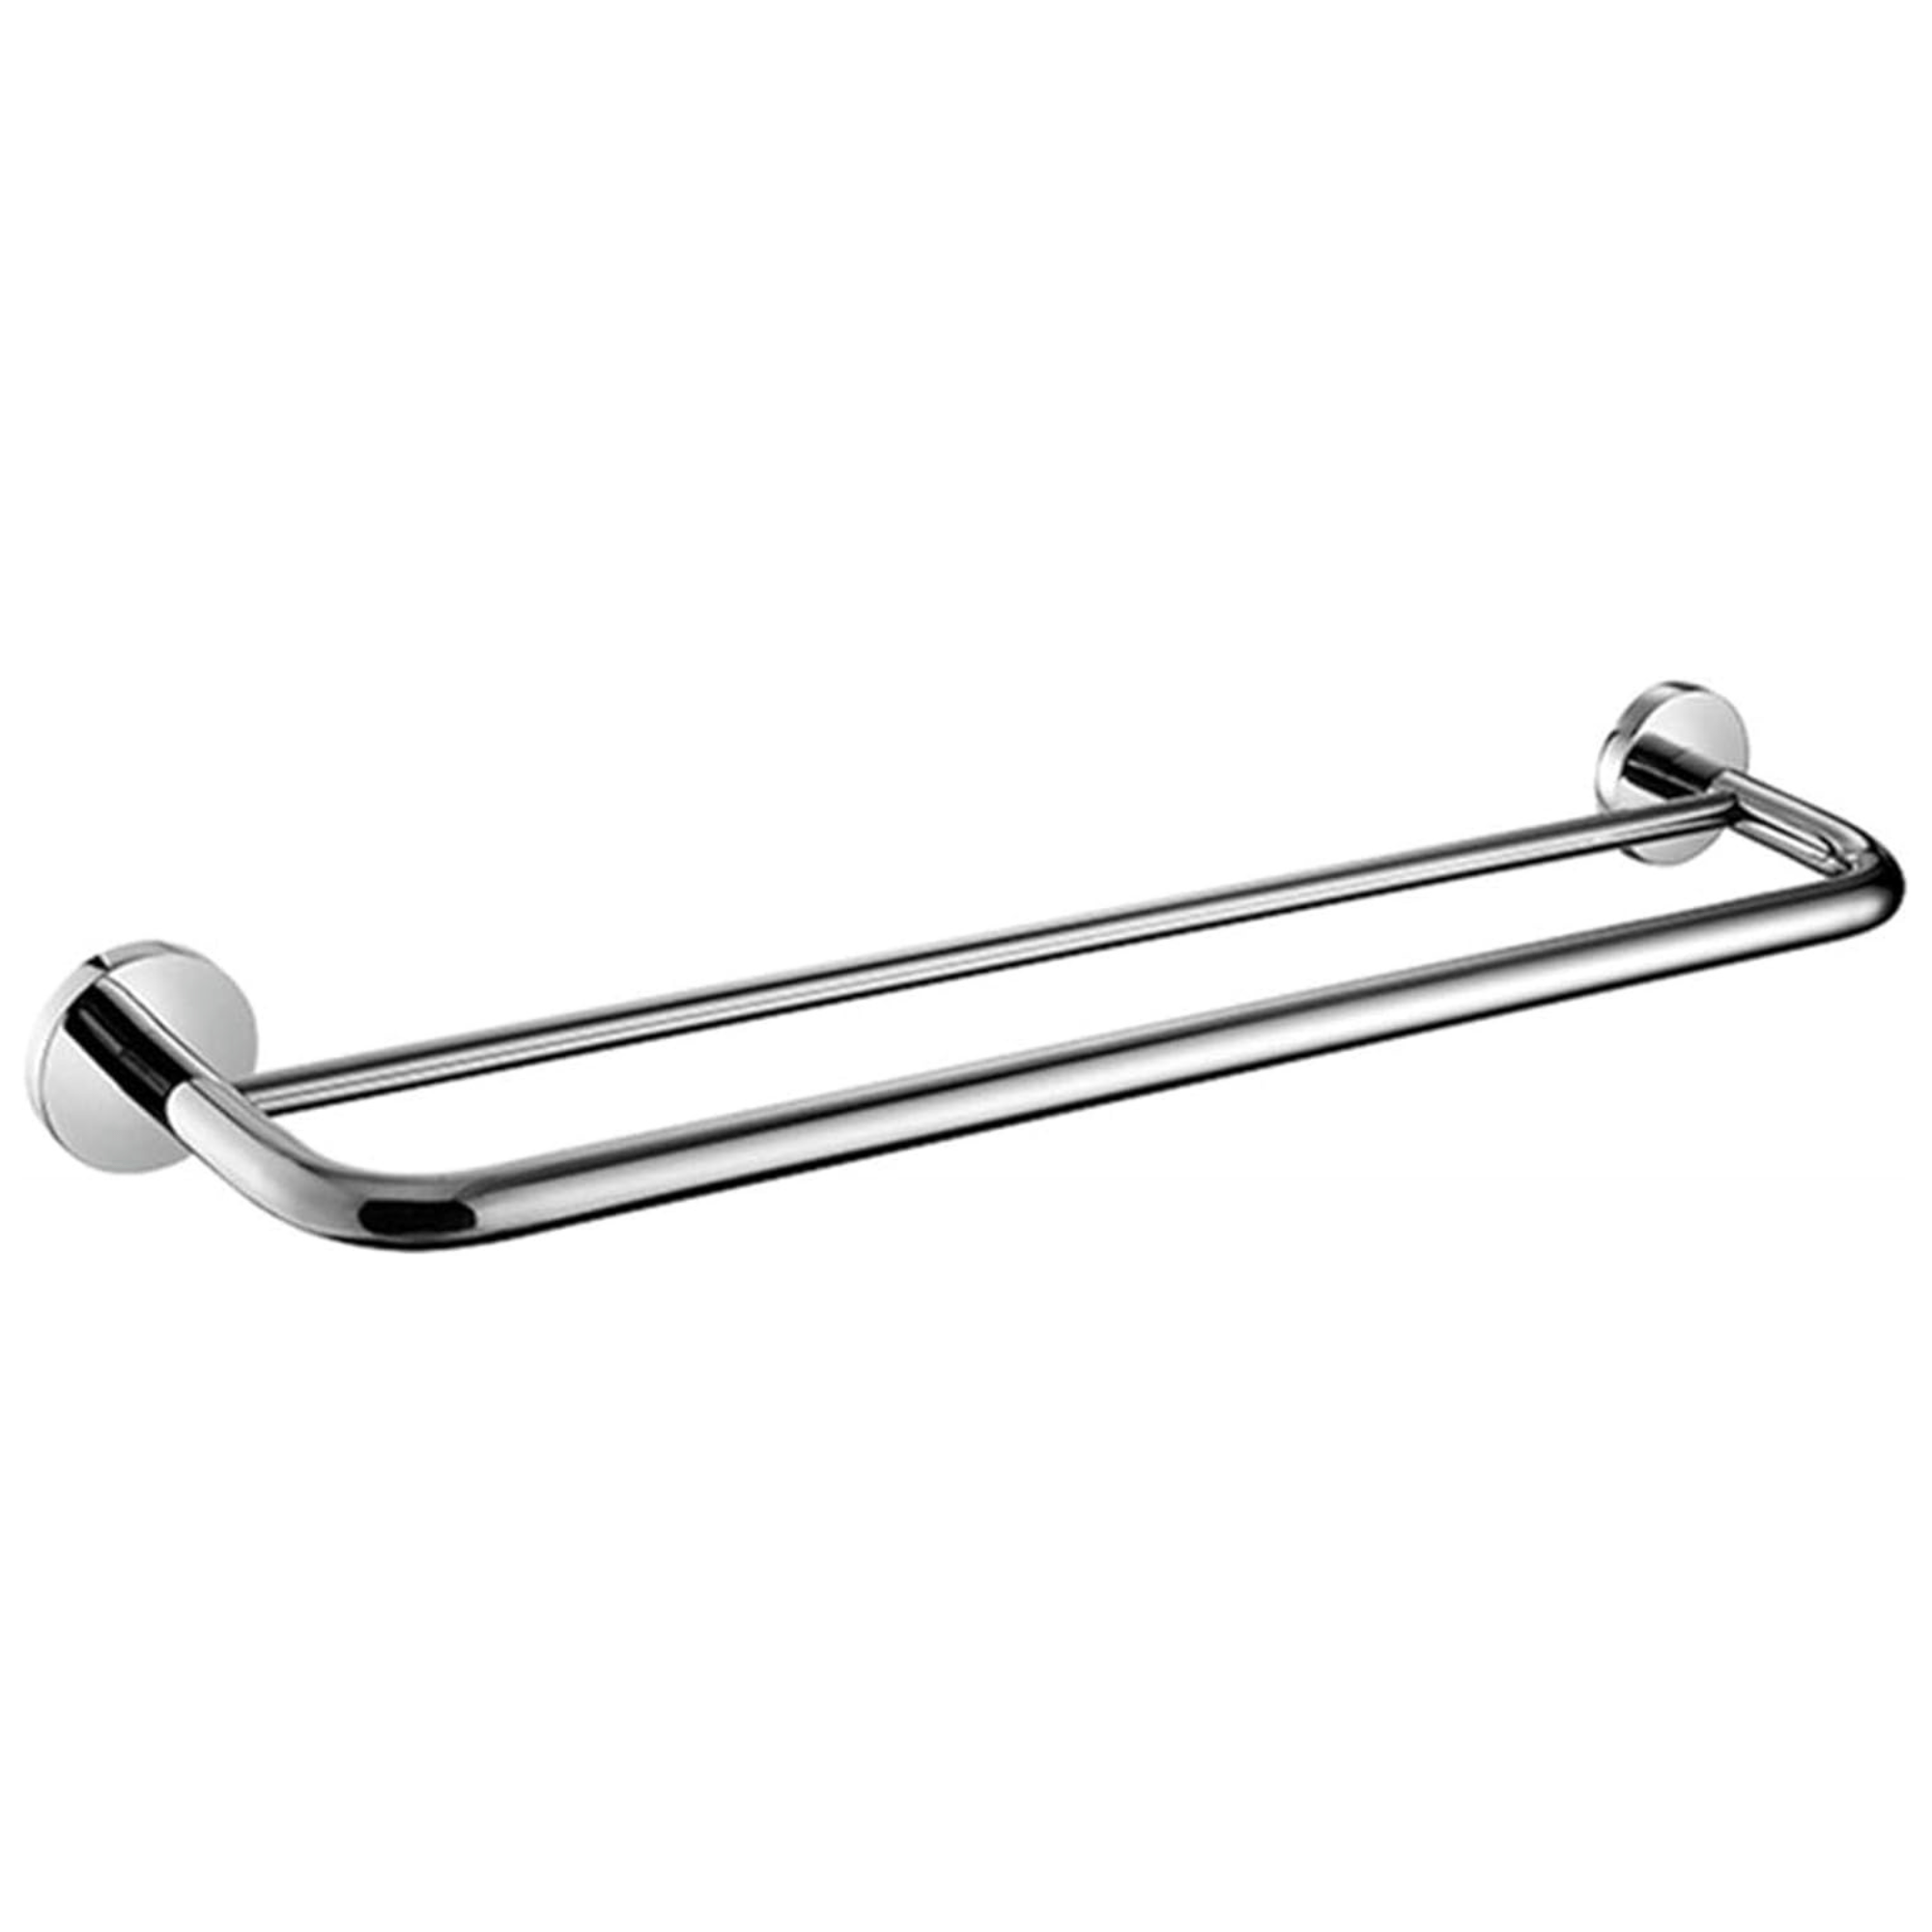 Shop Bathroom Stainless Steel Two Bar Towel Rack - L1048 | Buy at Supply Master Accra, Ghana Bathroom Accessories Buy Tools hardware Building materials